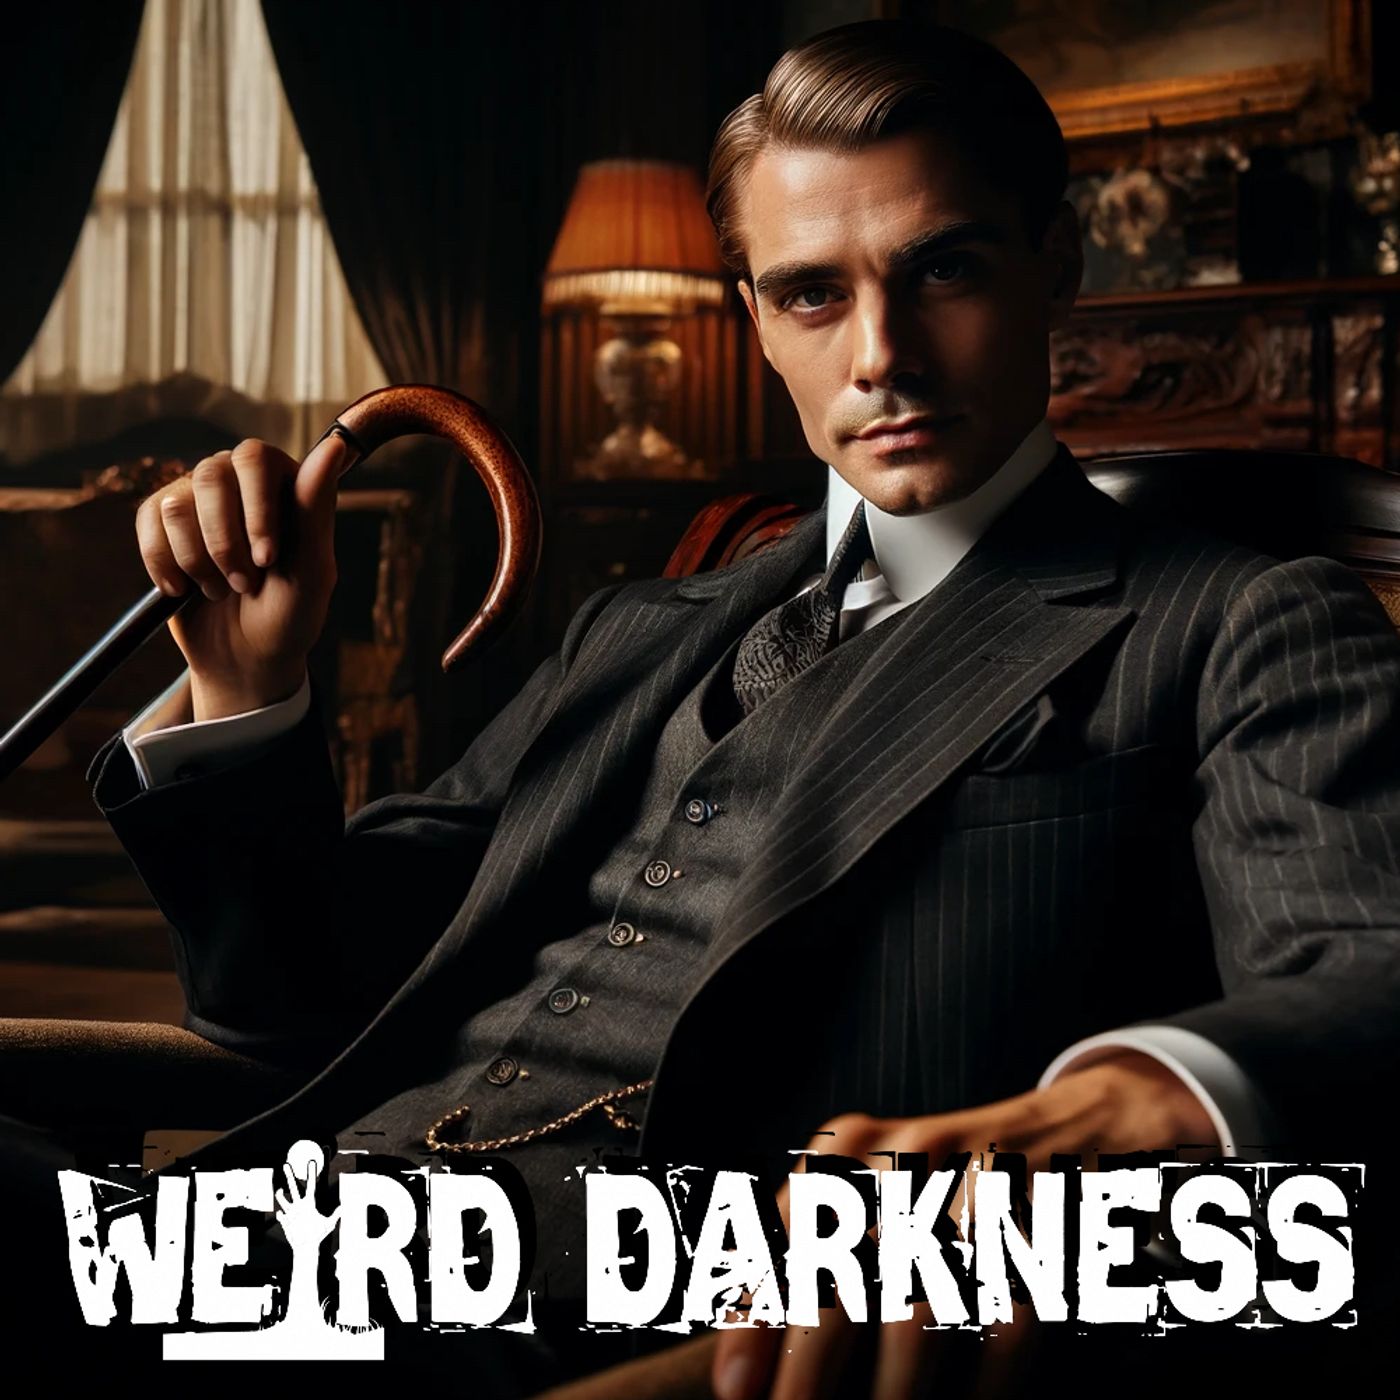 “THE IMMORTAL VAMPIRE OF NEW ORLEANS” and More Horrific True Stories! #WeirdDarkness #Darkives